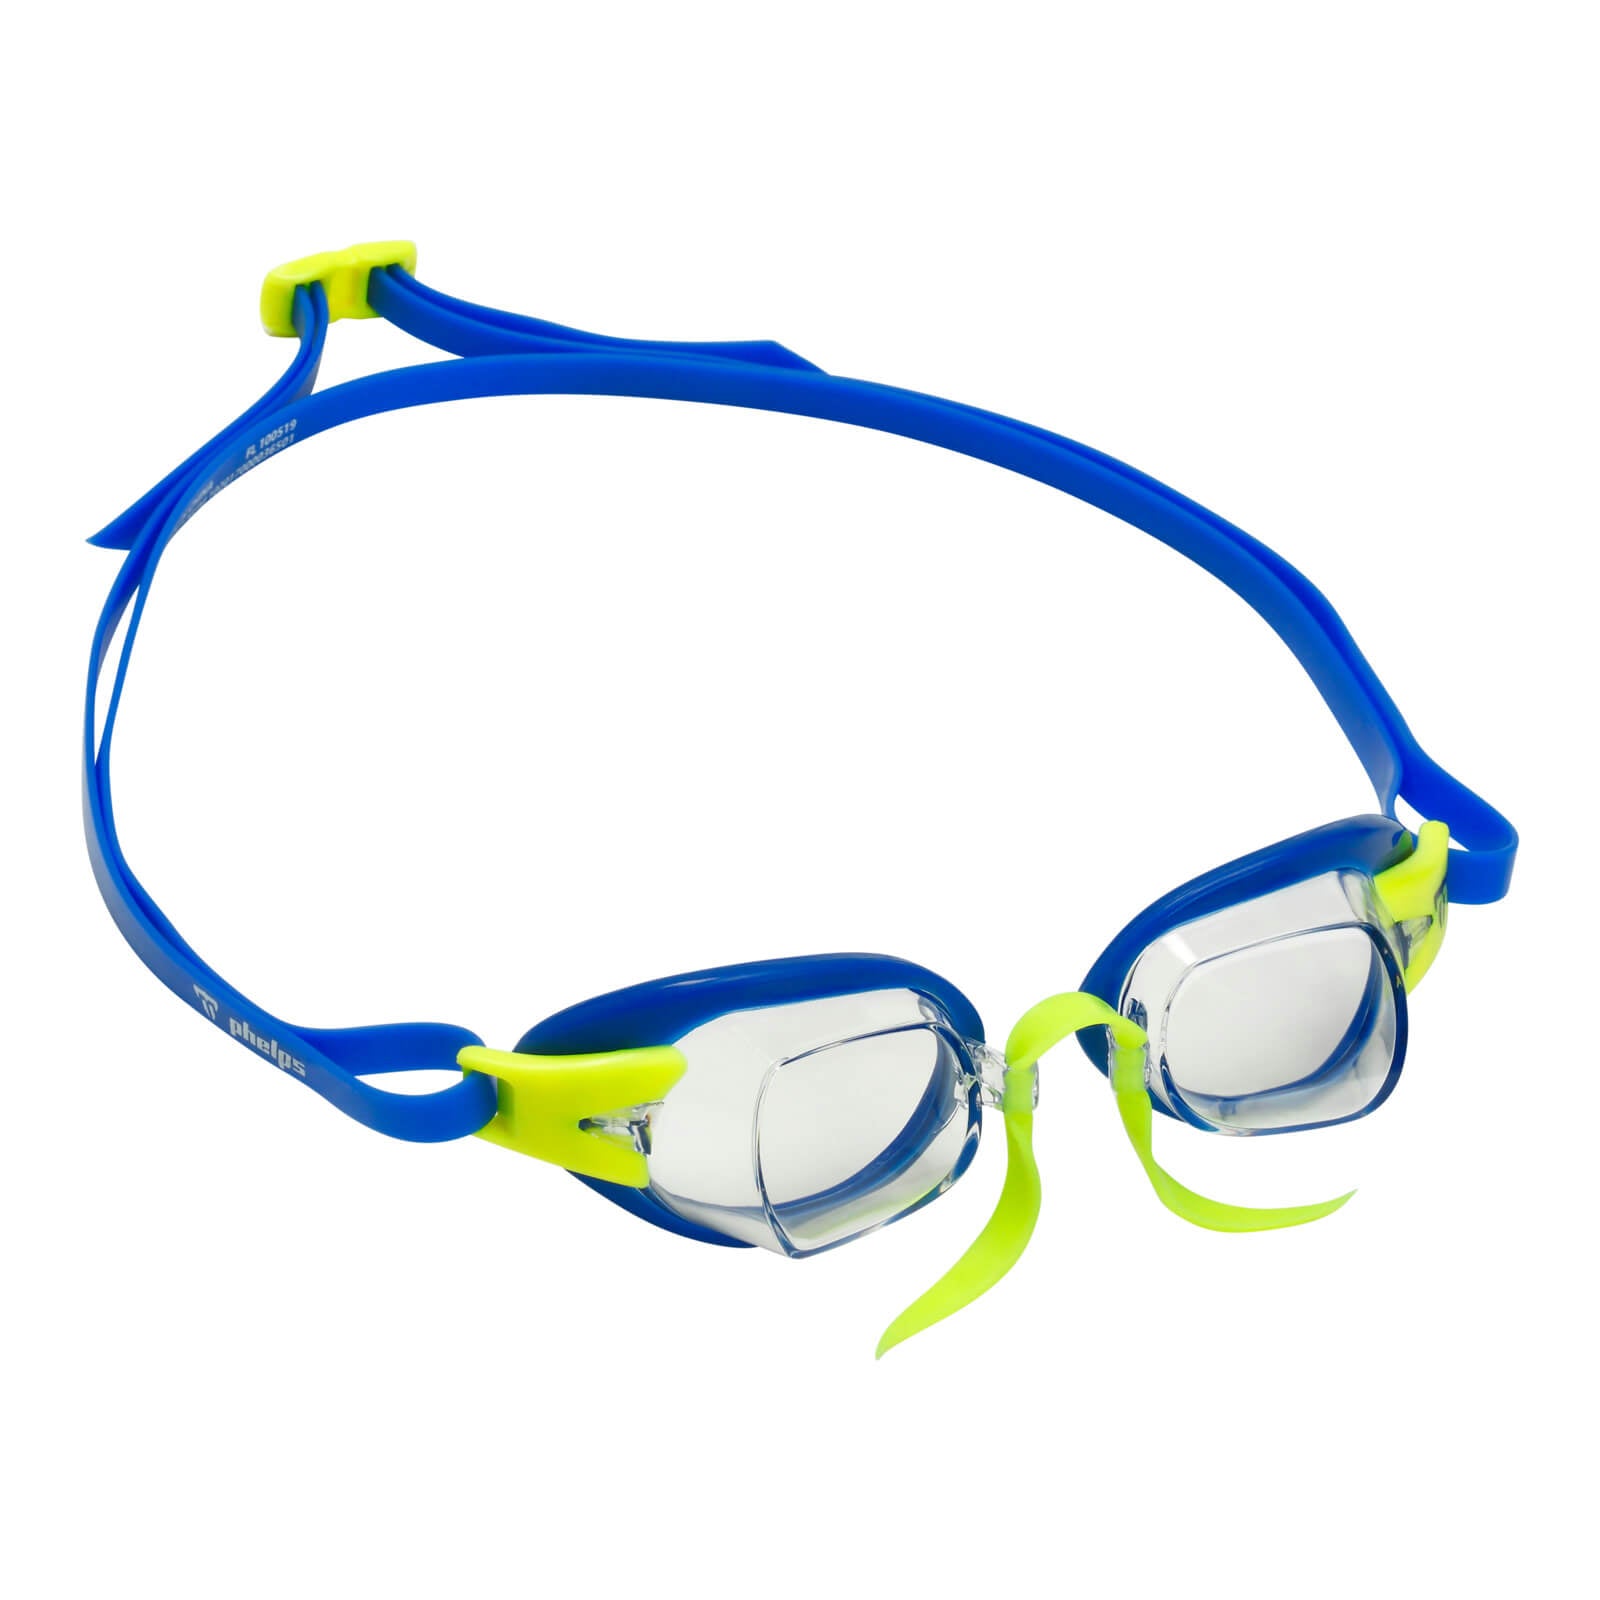 Phelps Chronos Men's Swimming Goggles Blue/Yellow Clear